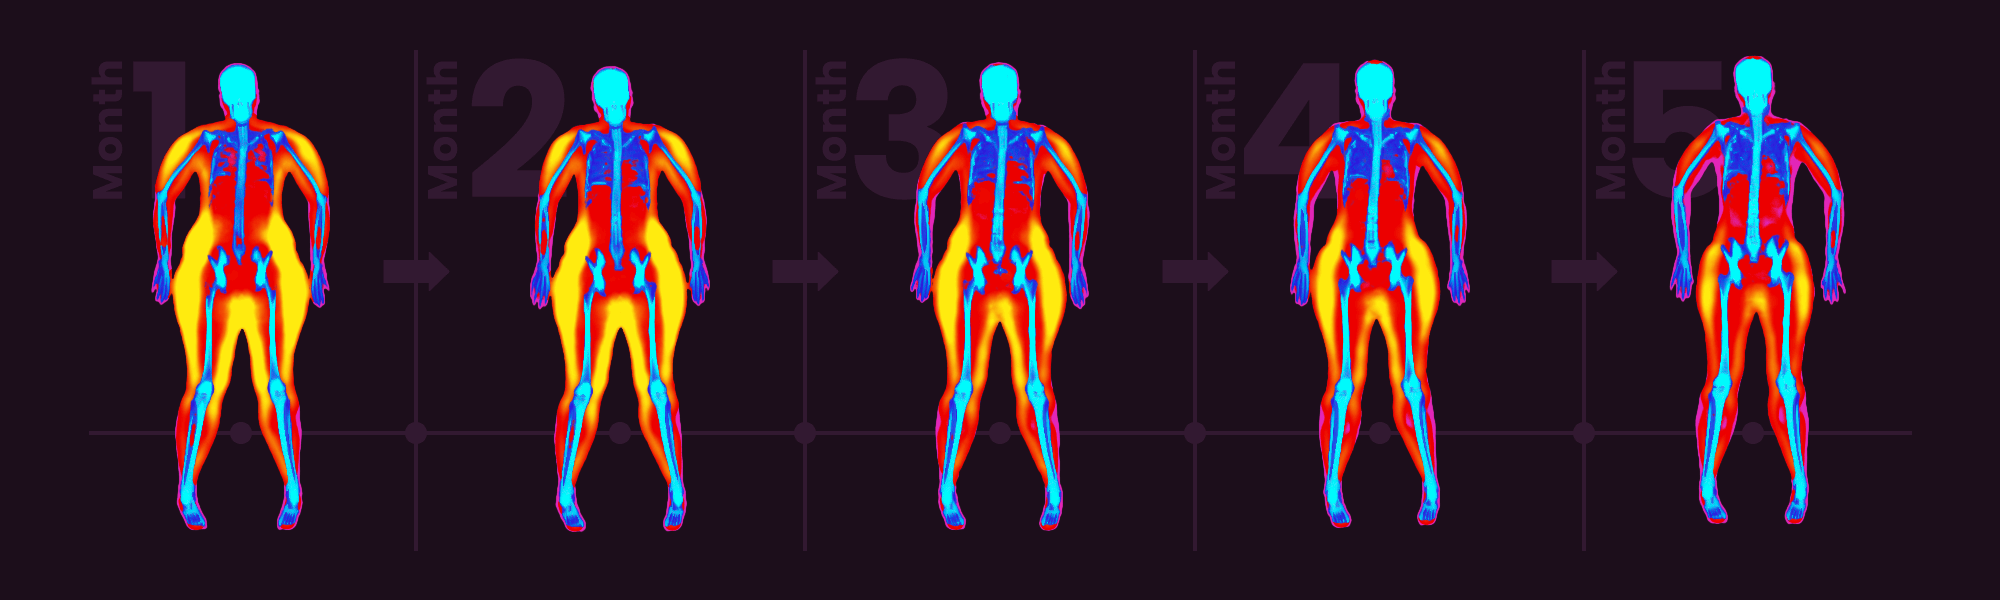 Composite image showing changes in body composition over 5 months